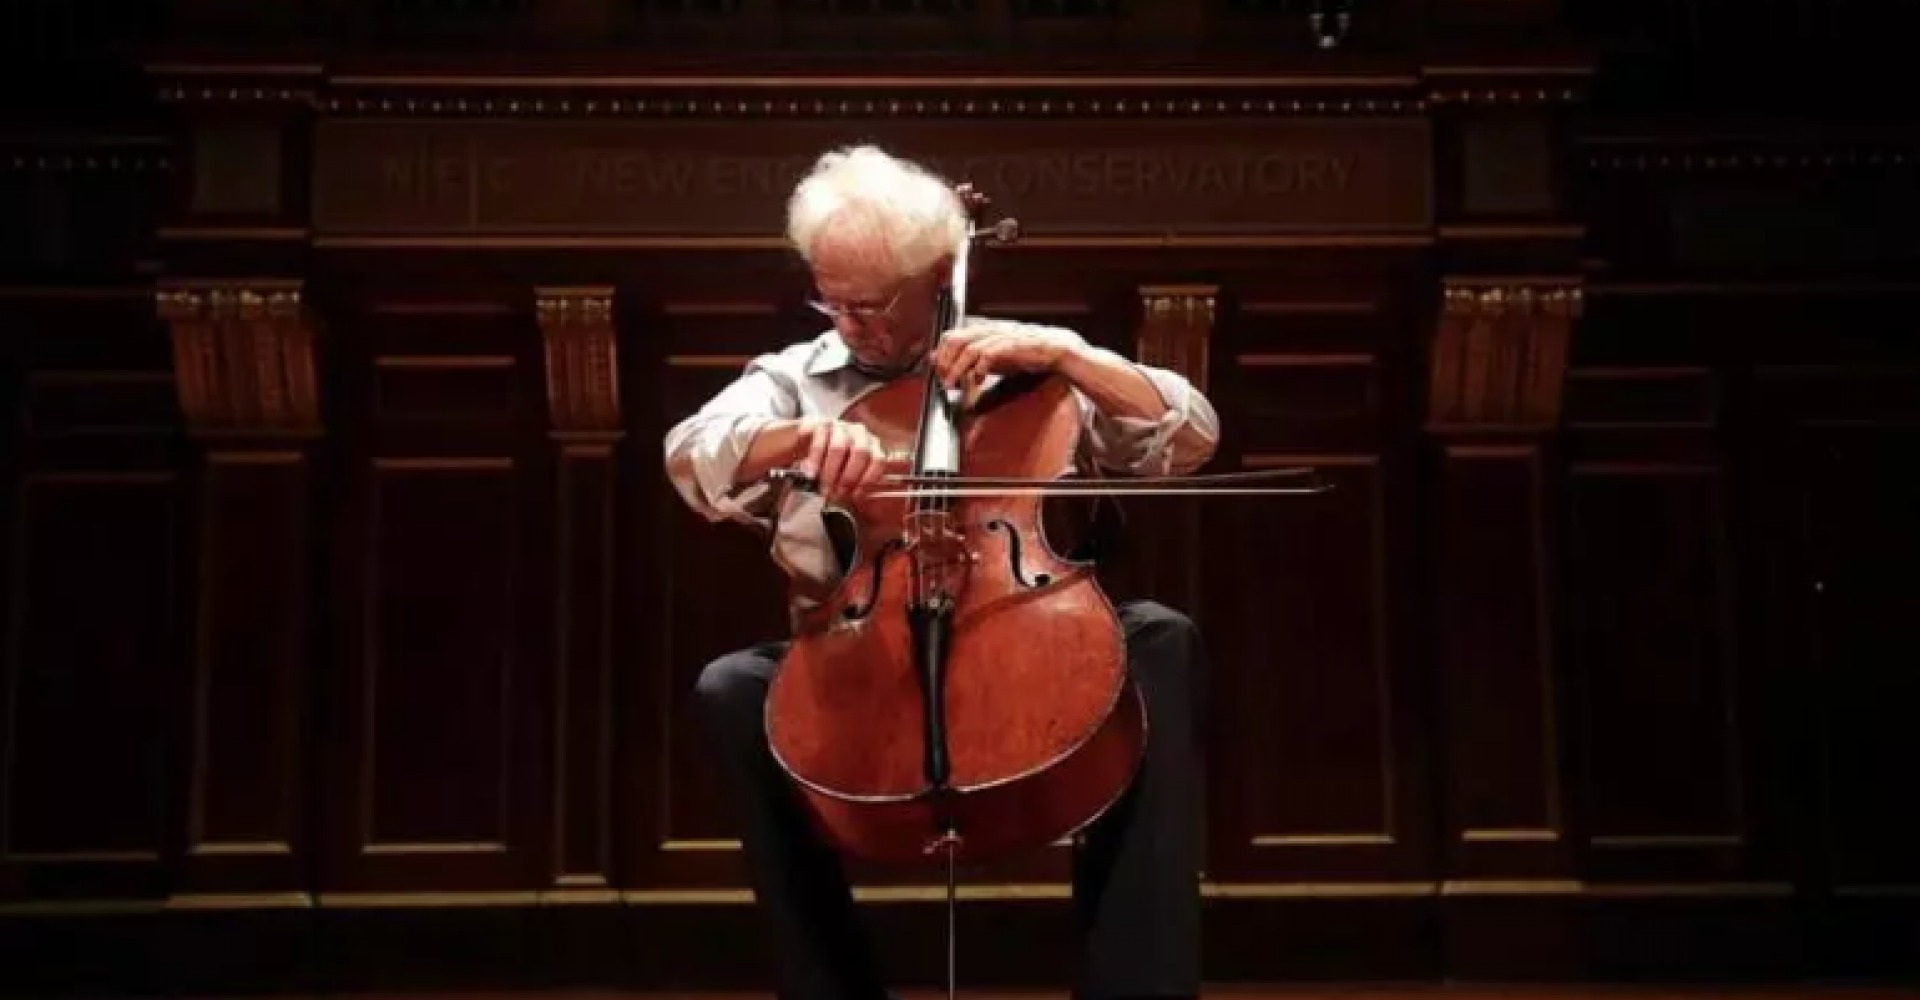 laurence lesser playing cello in jordan hall